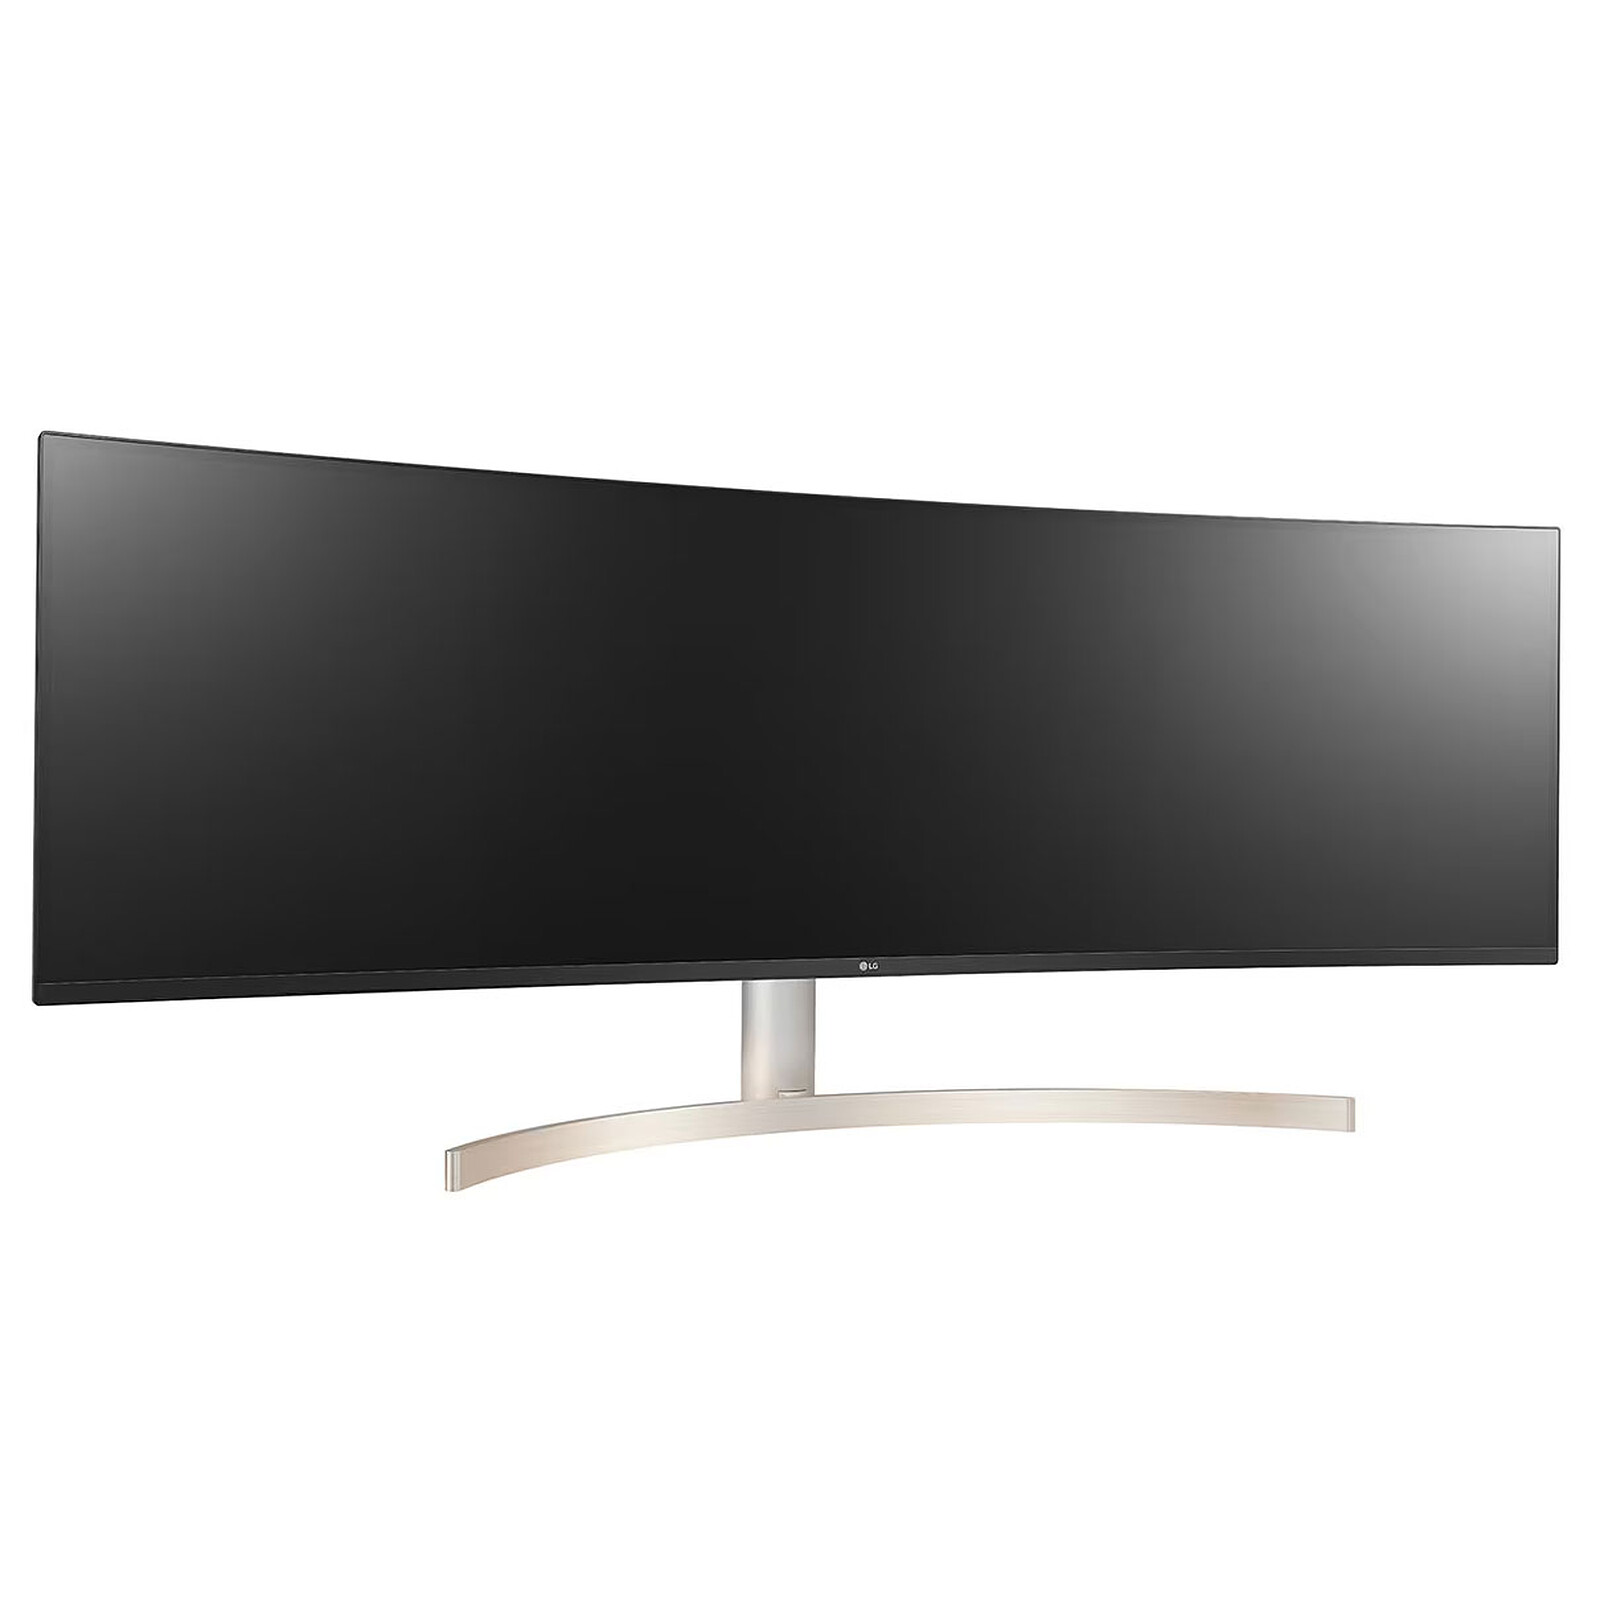 LG UltraWide 49WL95C-WE 49 32:9 Dual QHD 5120 x 1440 2K HDMI, DisplayPort,  USB-C, Built-in Speakers HDR10 3-with Height/Tilt/ Swivel Adjustable Stand  IPS Curved Monitor 